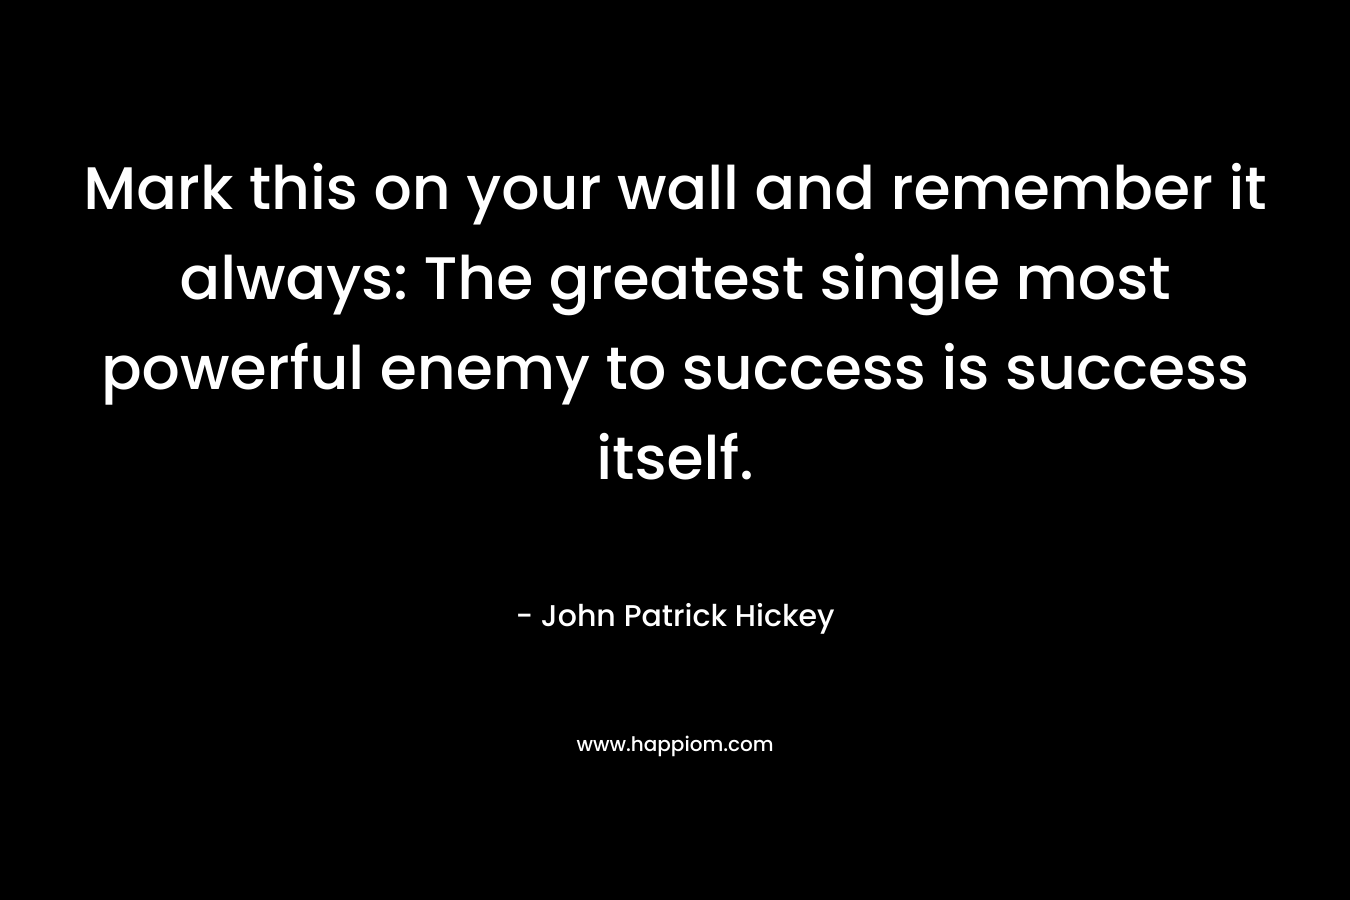 Mark this on your wall and remember it always: The greatest single most powerful enemy to success is success itself.